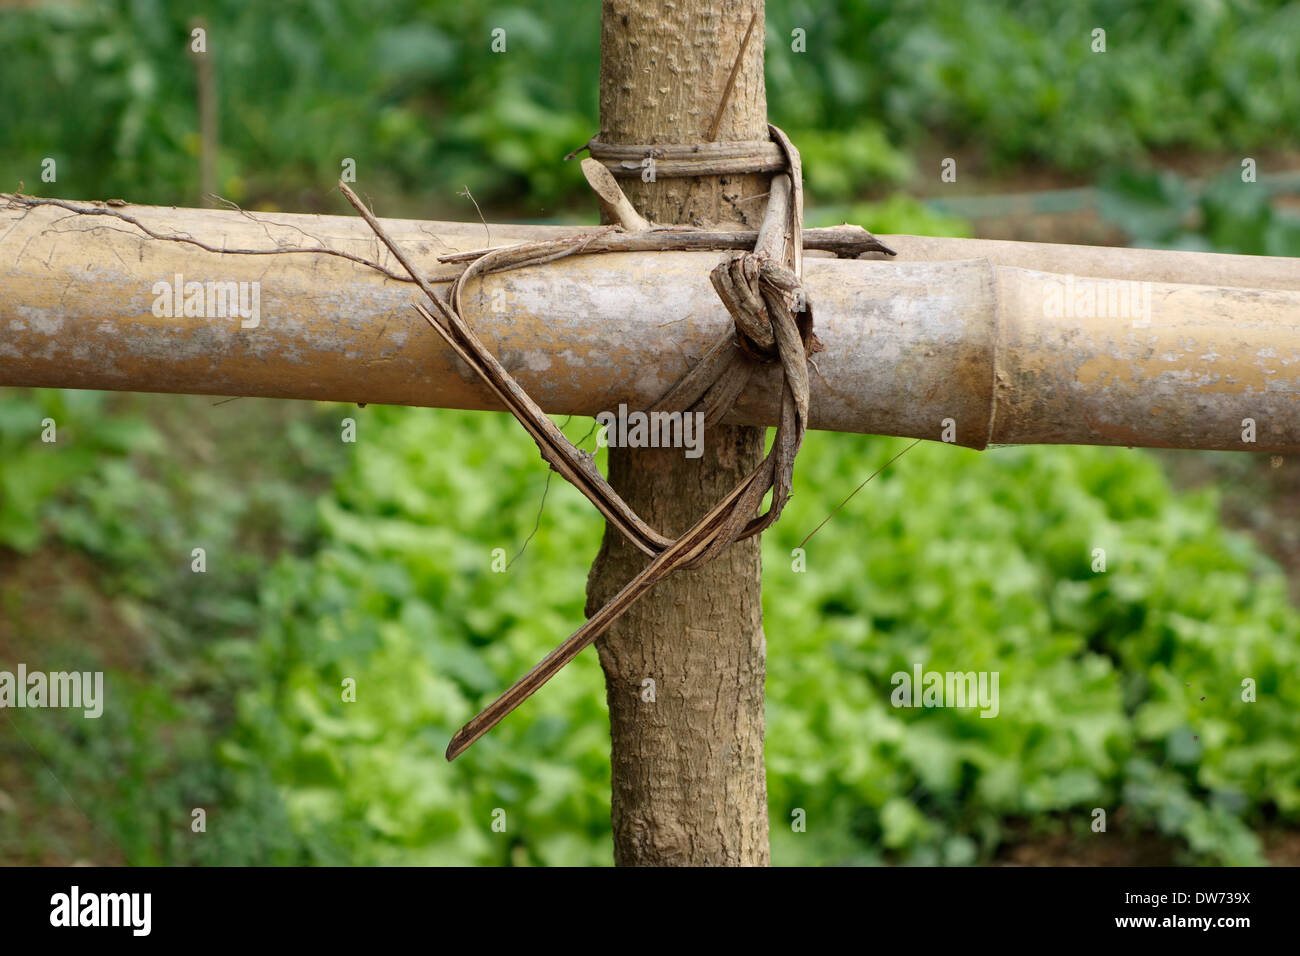 Bamboo fence protecting a garden next to the Nam Lik River in Laos. Stock Photo